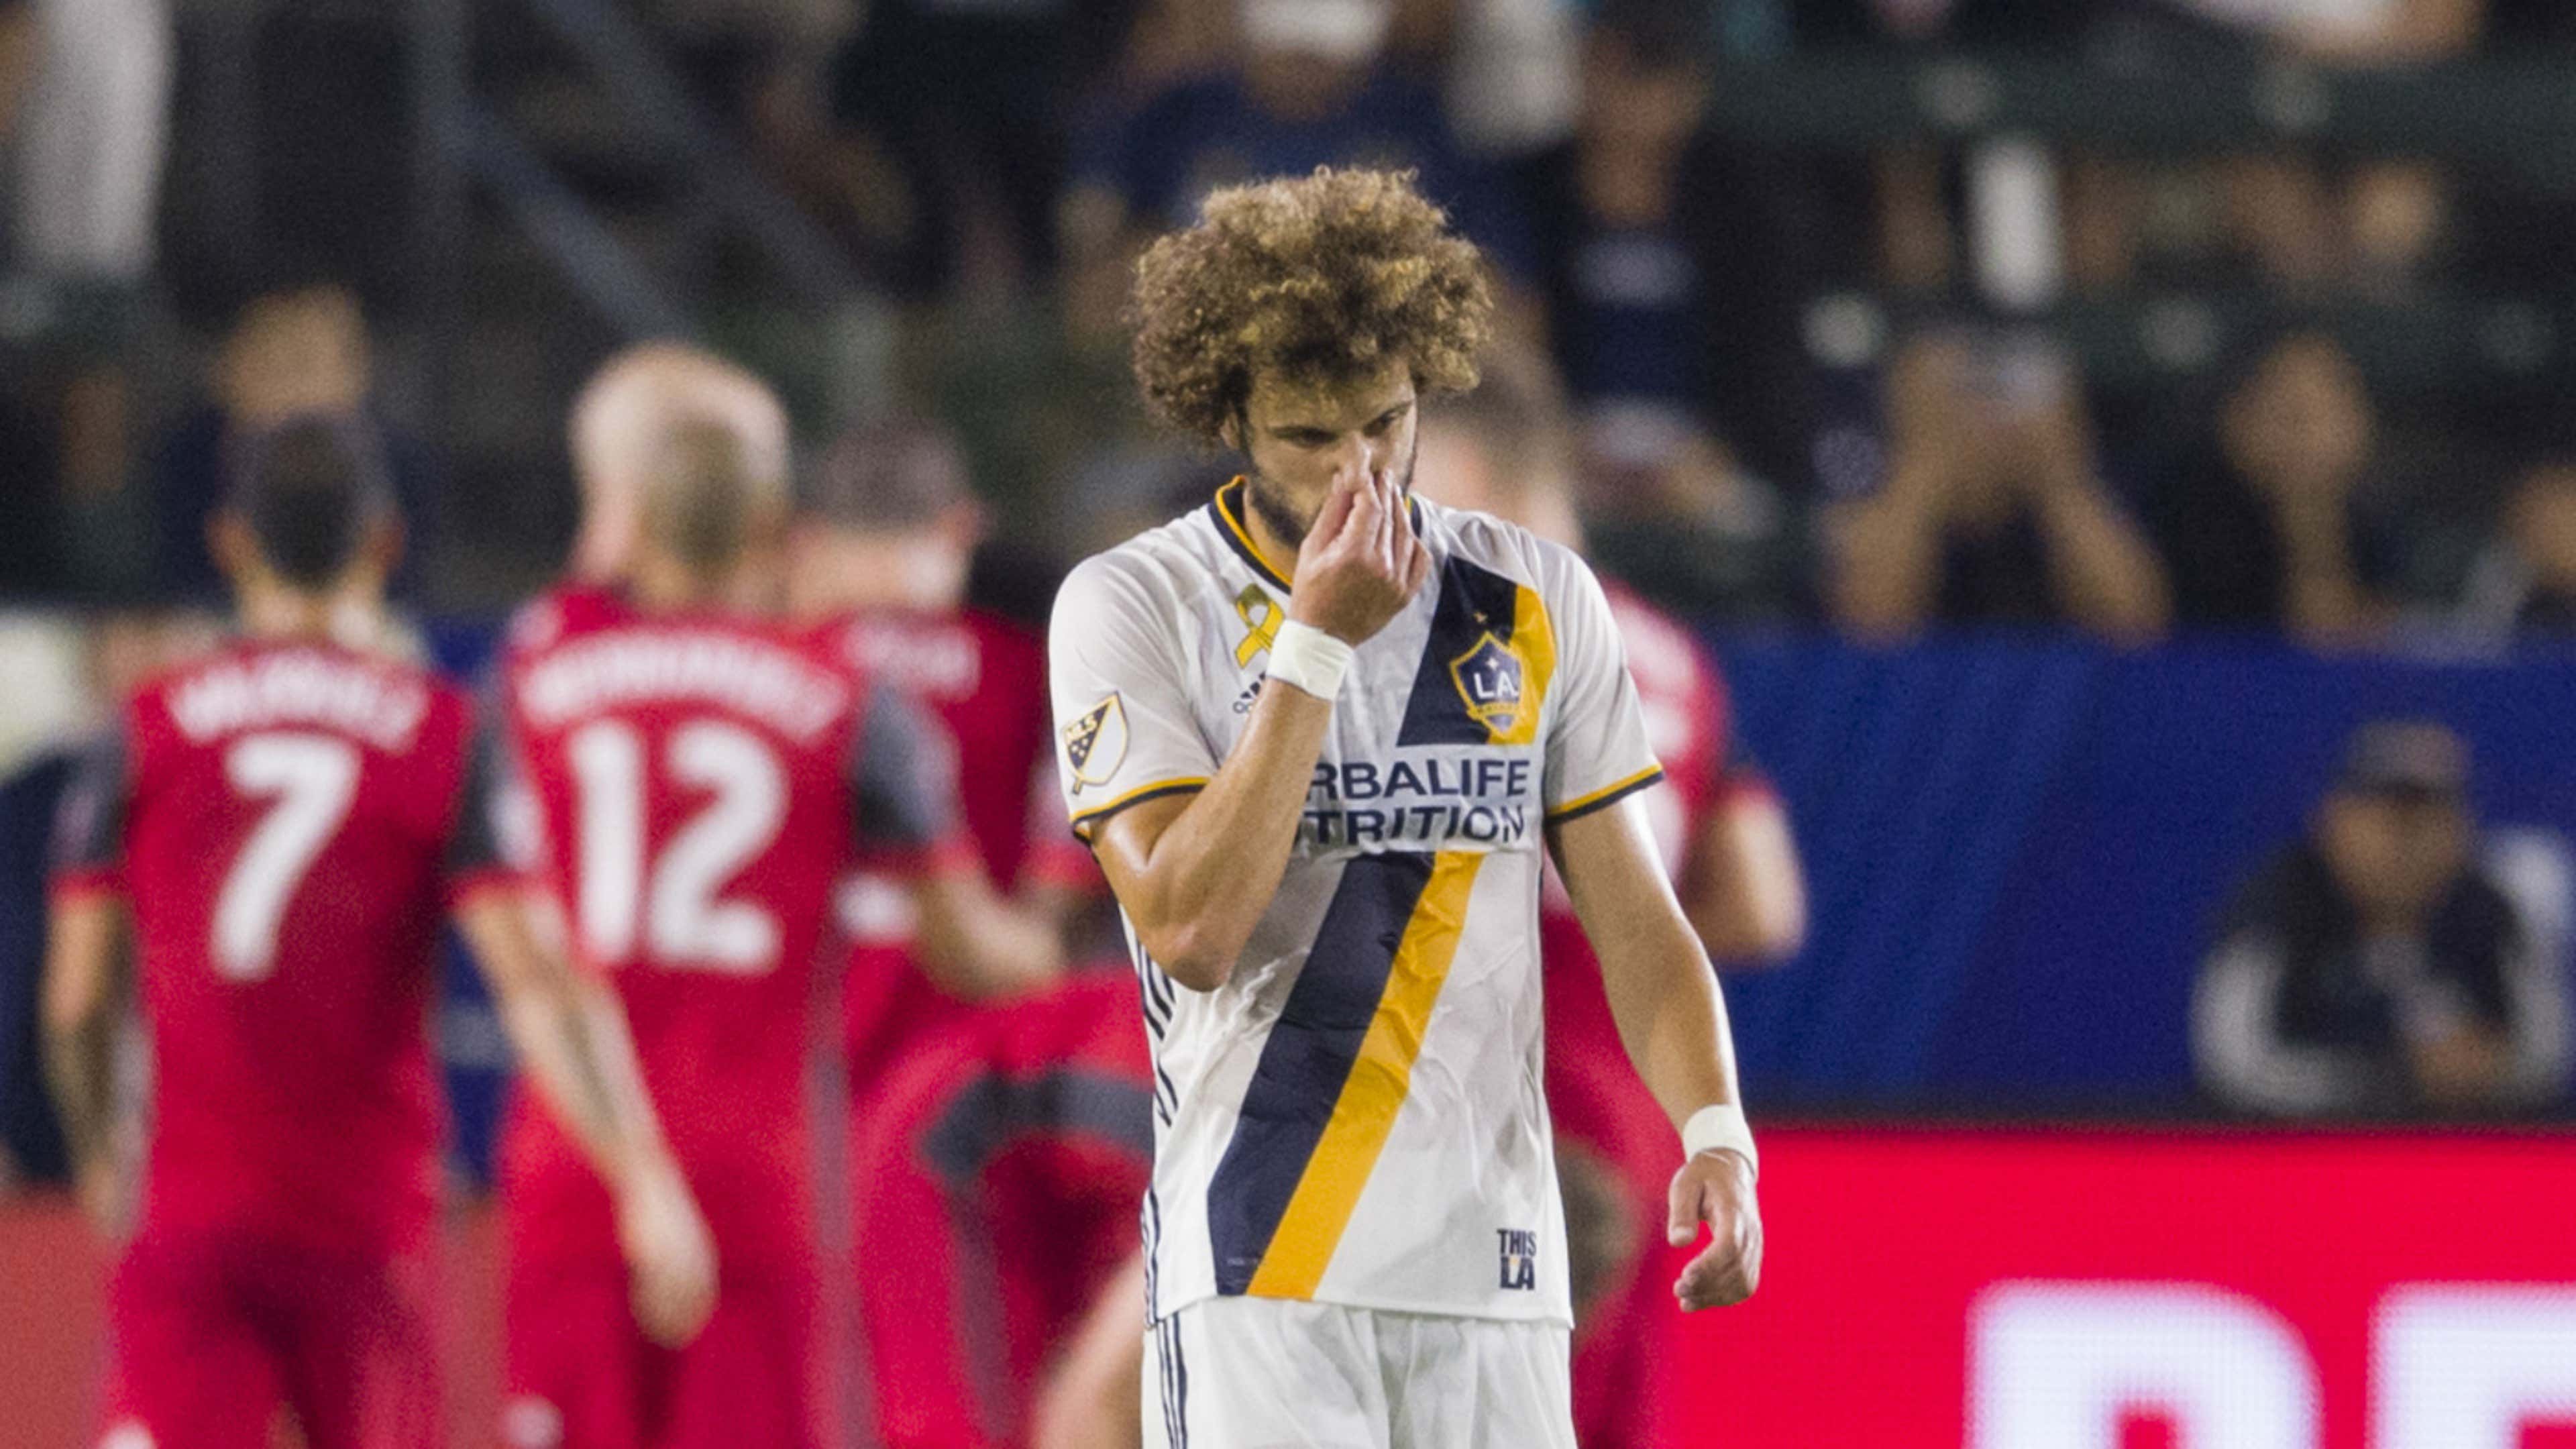 WATCH: LA Galaxy stay in playoff picture with win over Atlanta